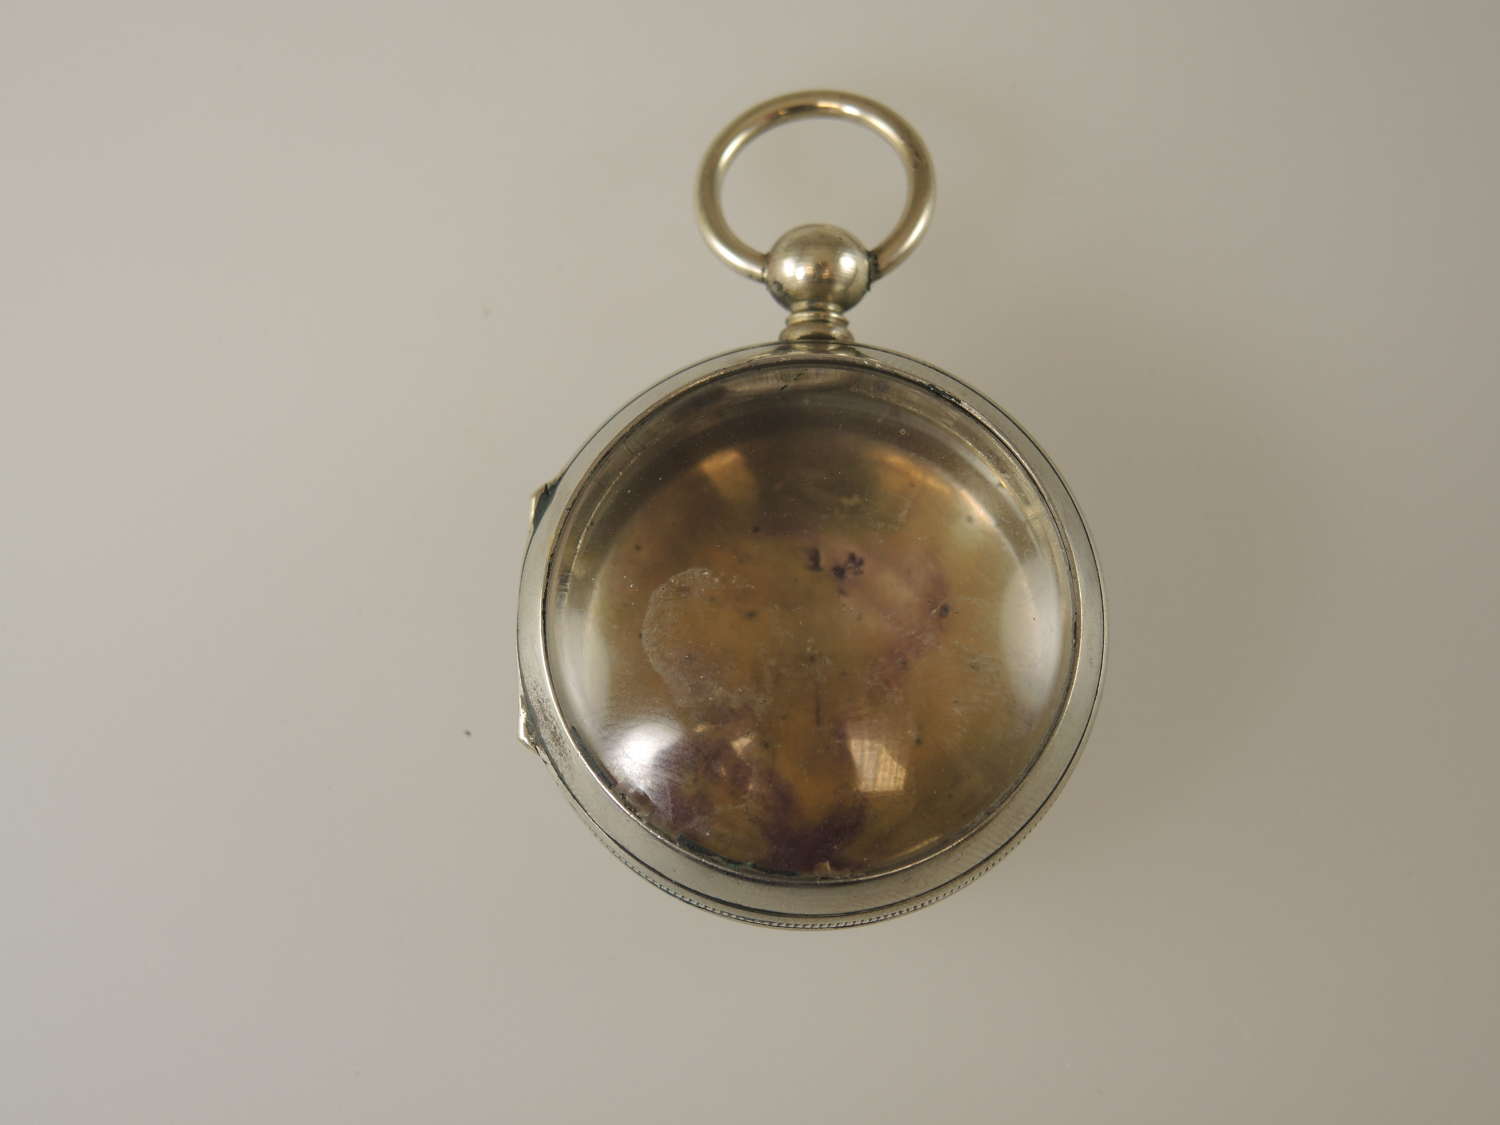 Gilt metal pocket watch case Suitable for pendant or locket also c1850